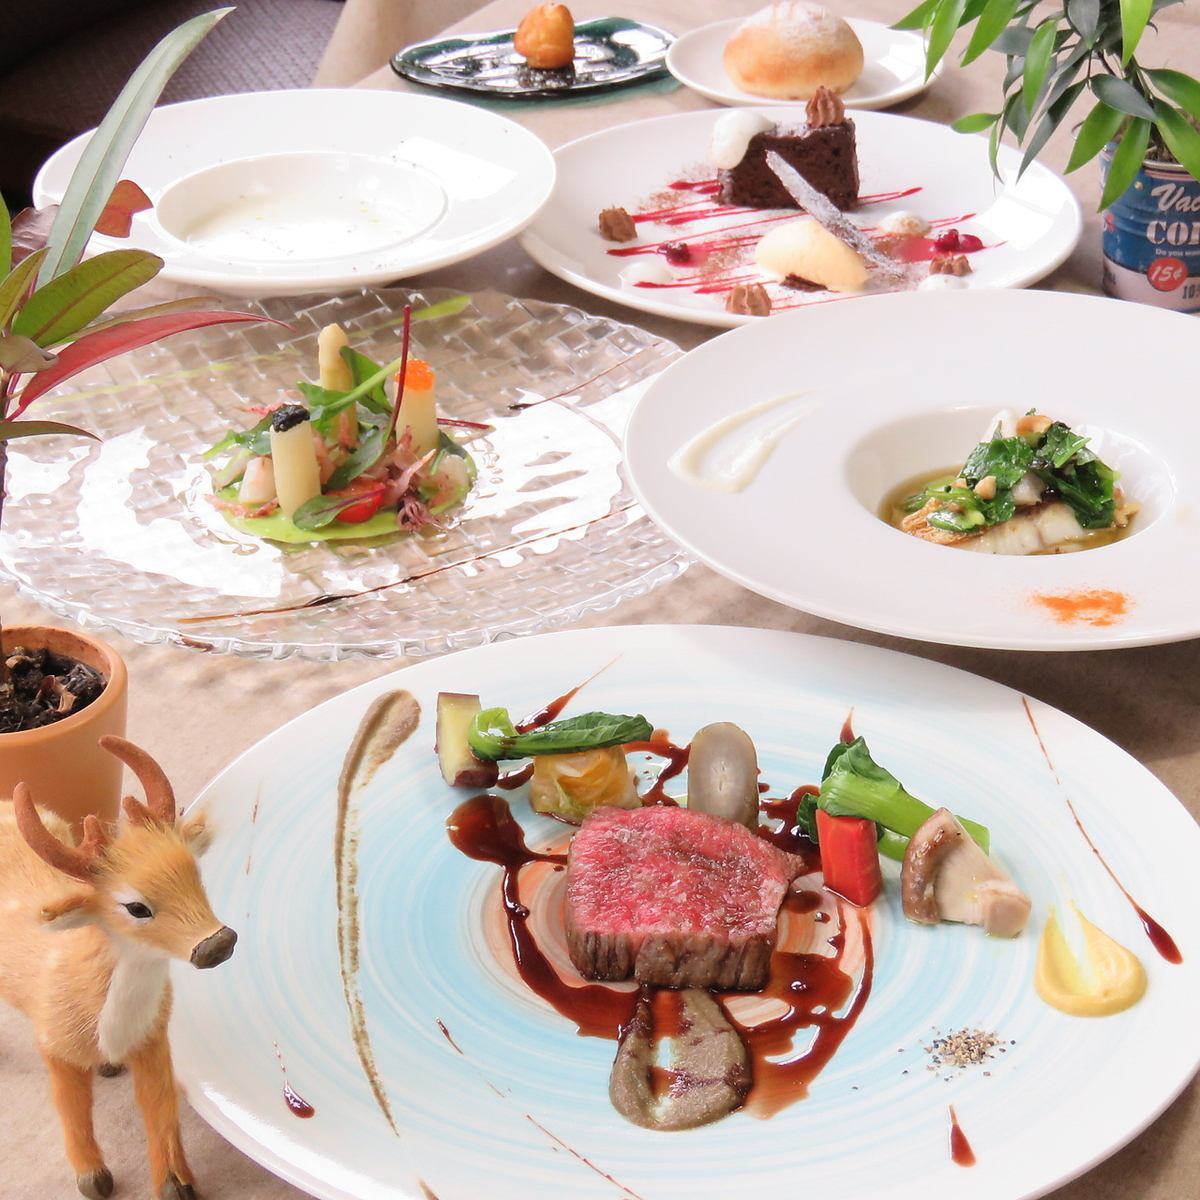 Food is luxury French, price is bistro fee.Restaurants filled with chef Date's restaurant